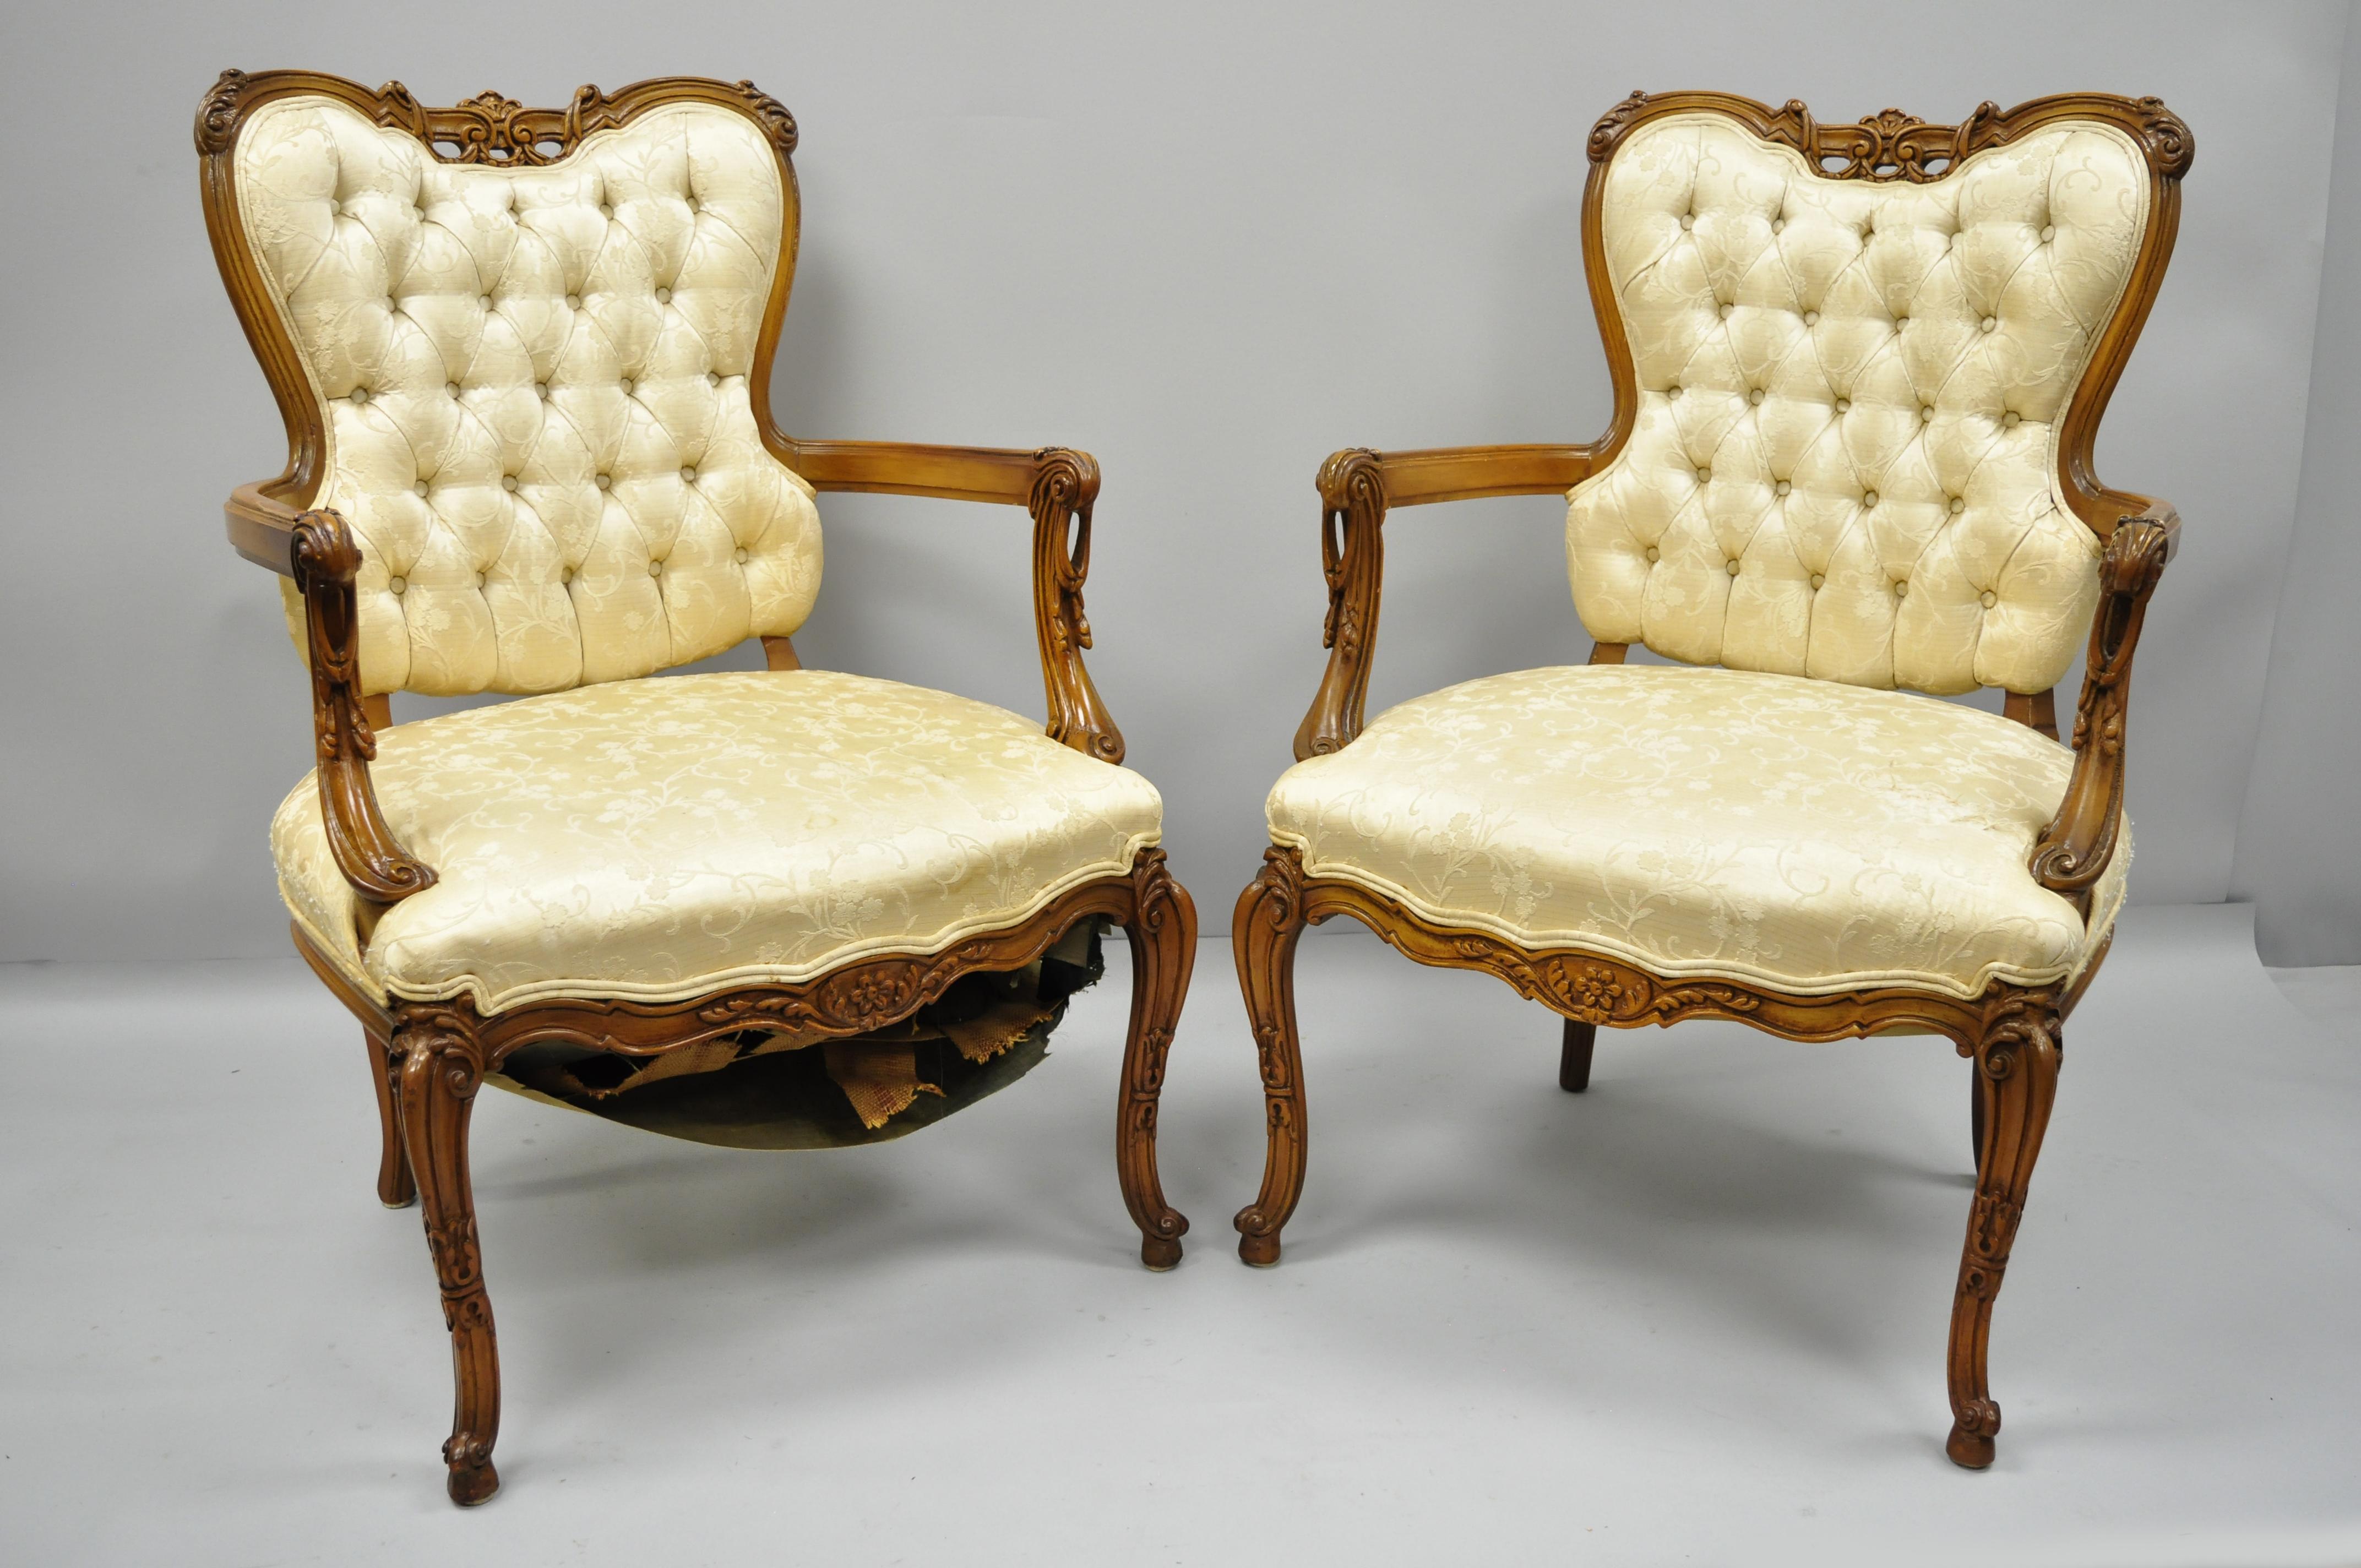 Pair of French Louis XV style carved fireside armchairs. Item features open drape carved arms, nicely carved top rail, solid wood construction, cabriole legs, and great style and form, circa early to mid-20th century. Measurements: 38